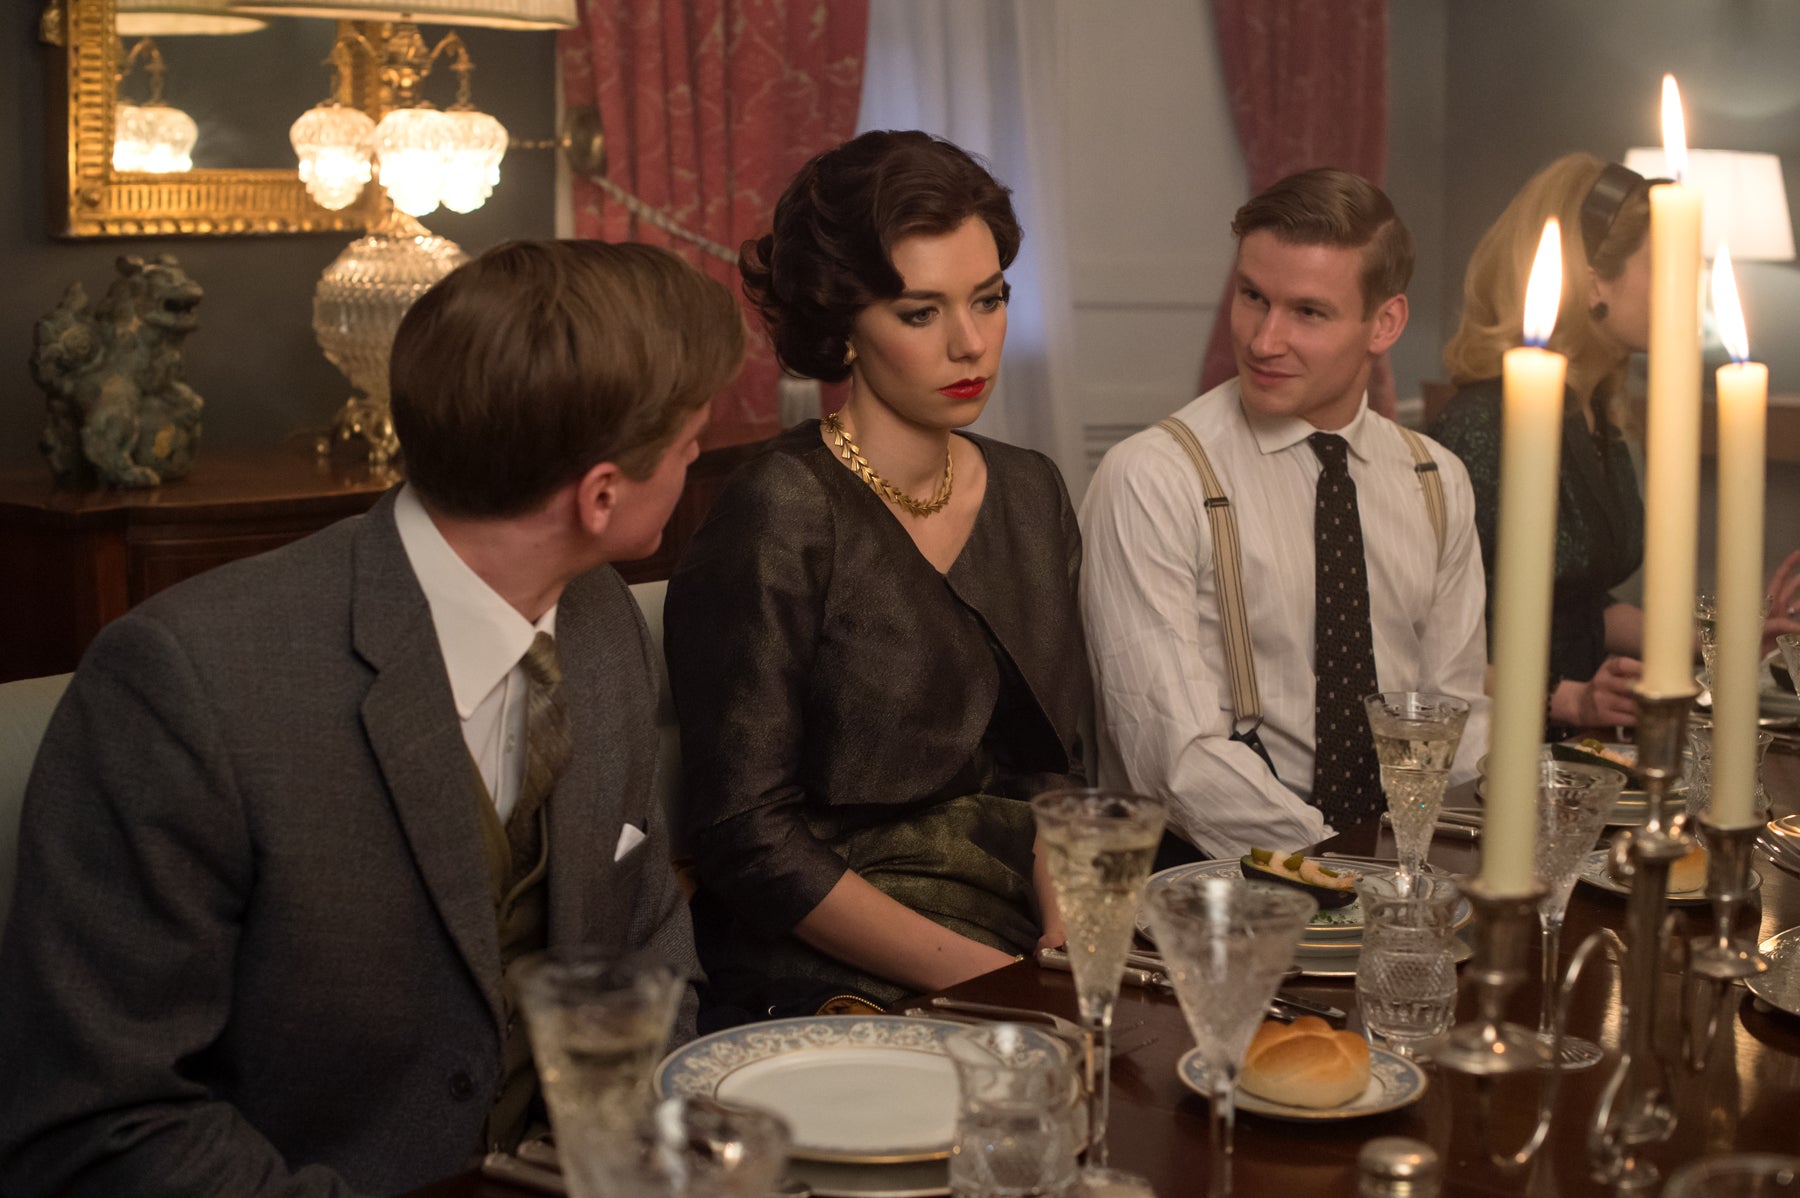 Princess Margaret (Vanessa Kirby) sits uncomfortably between two dinner guests